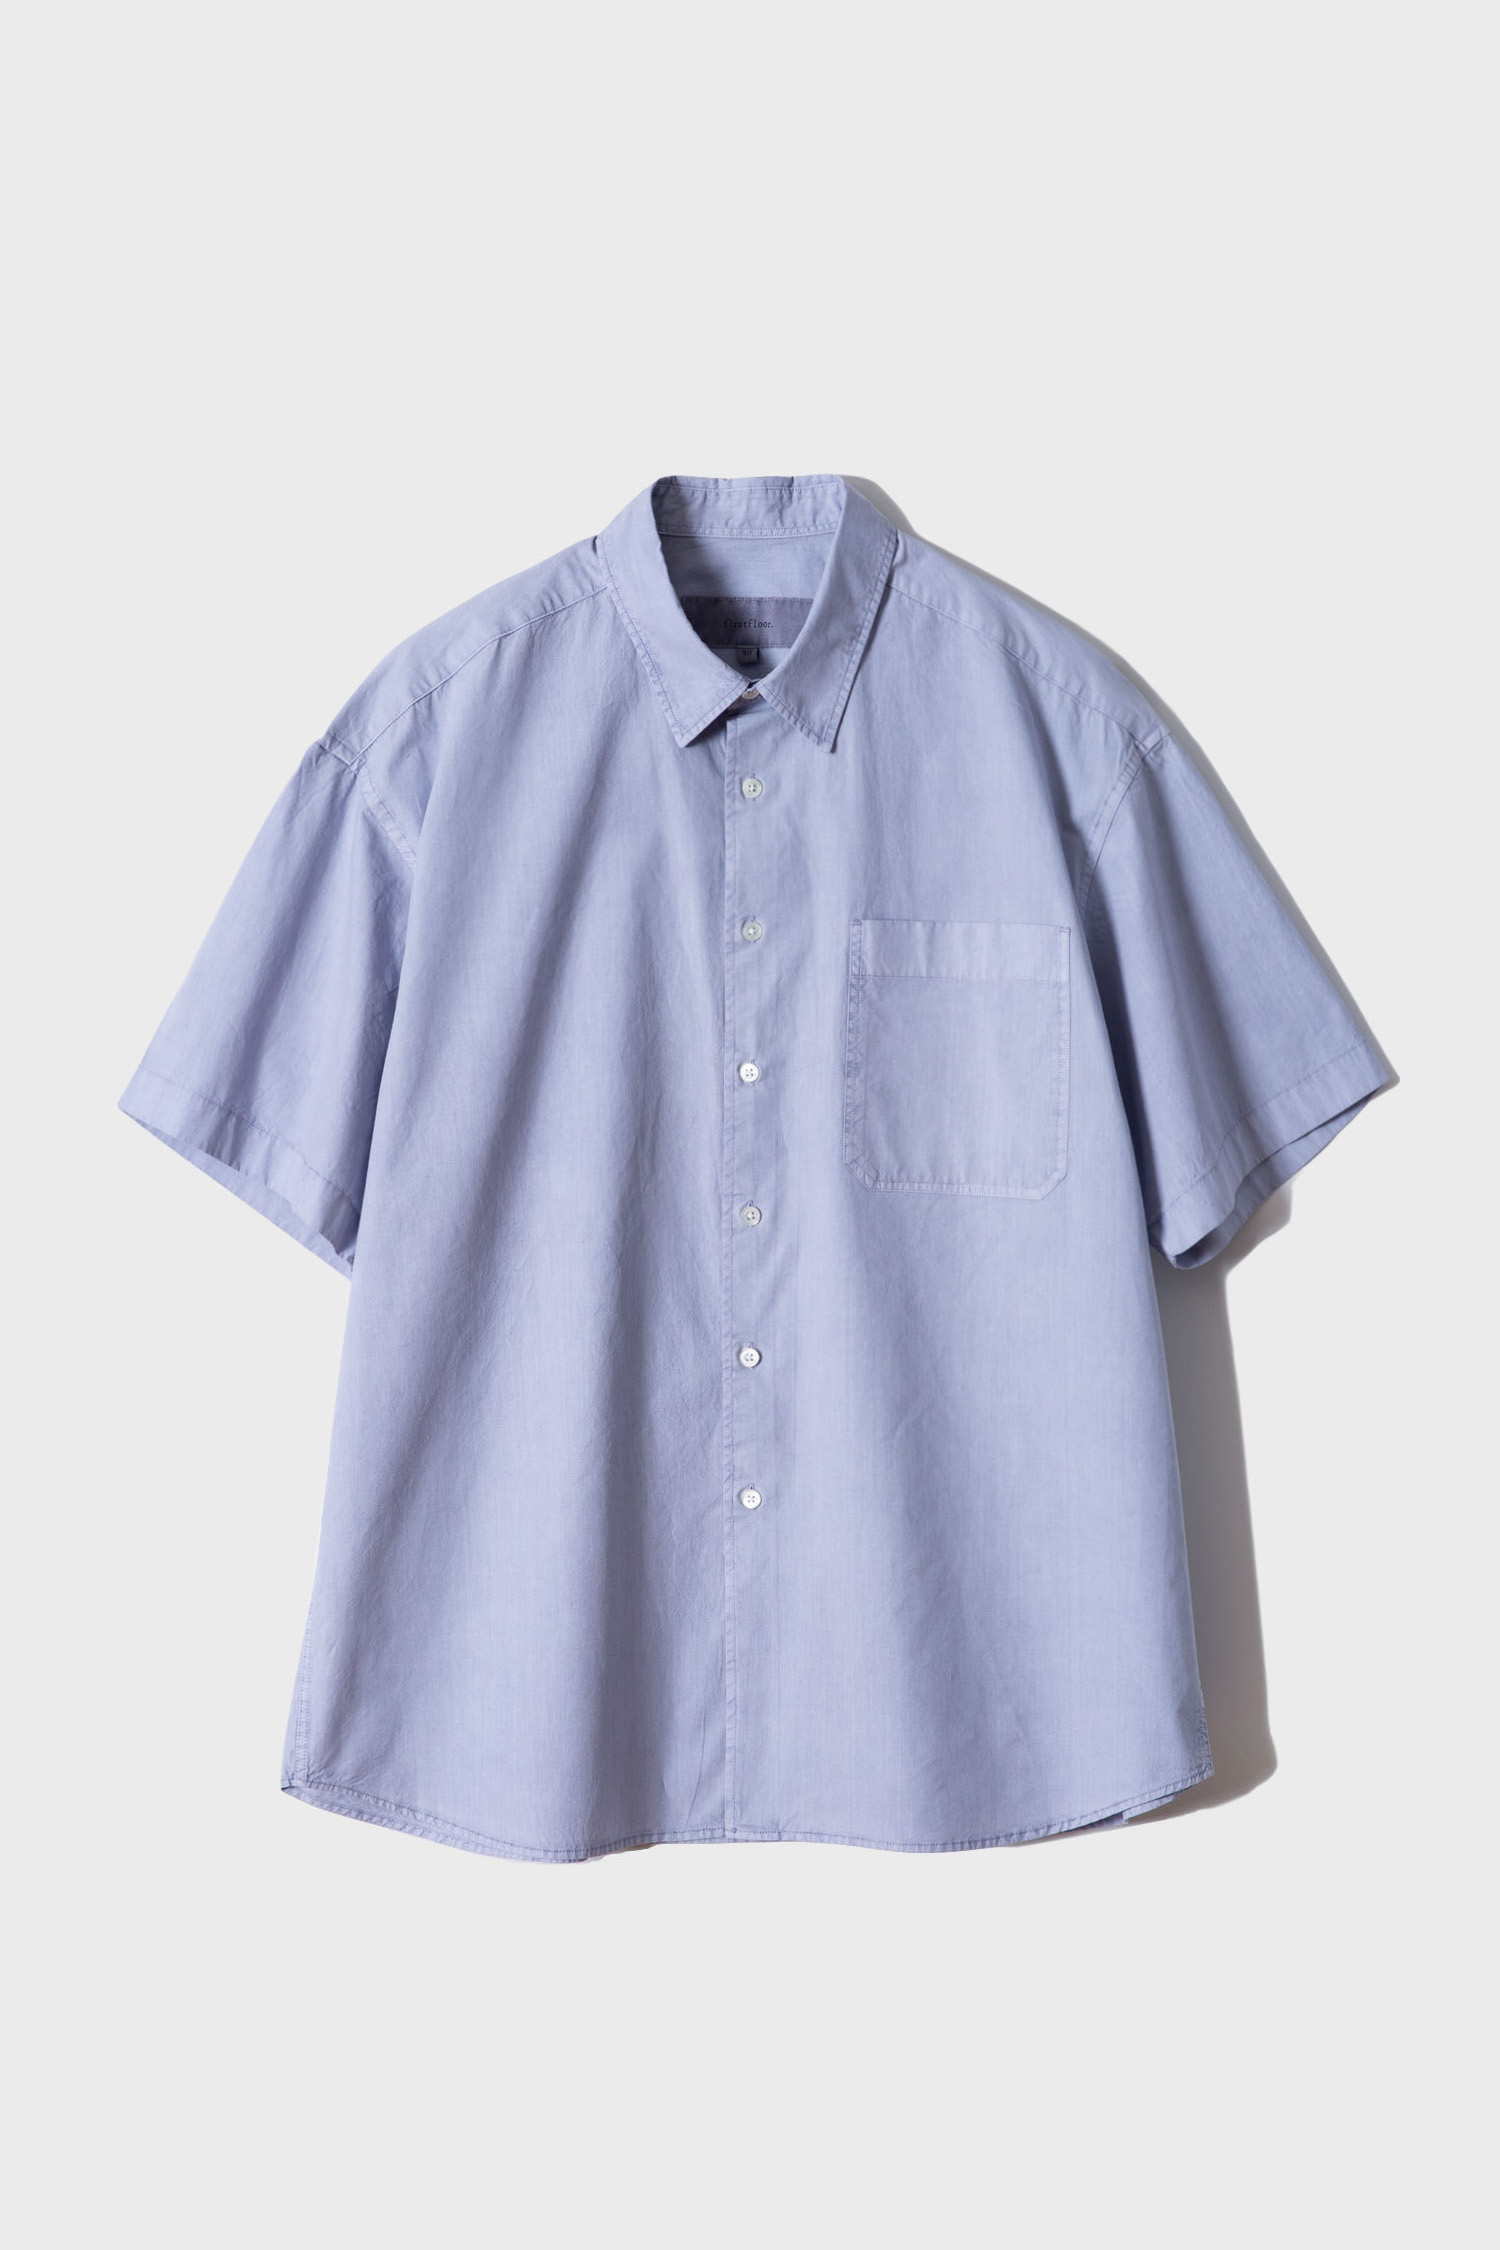 Dyed summer shirt (5 colors, japanese processed)